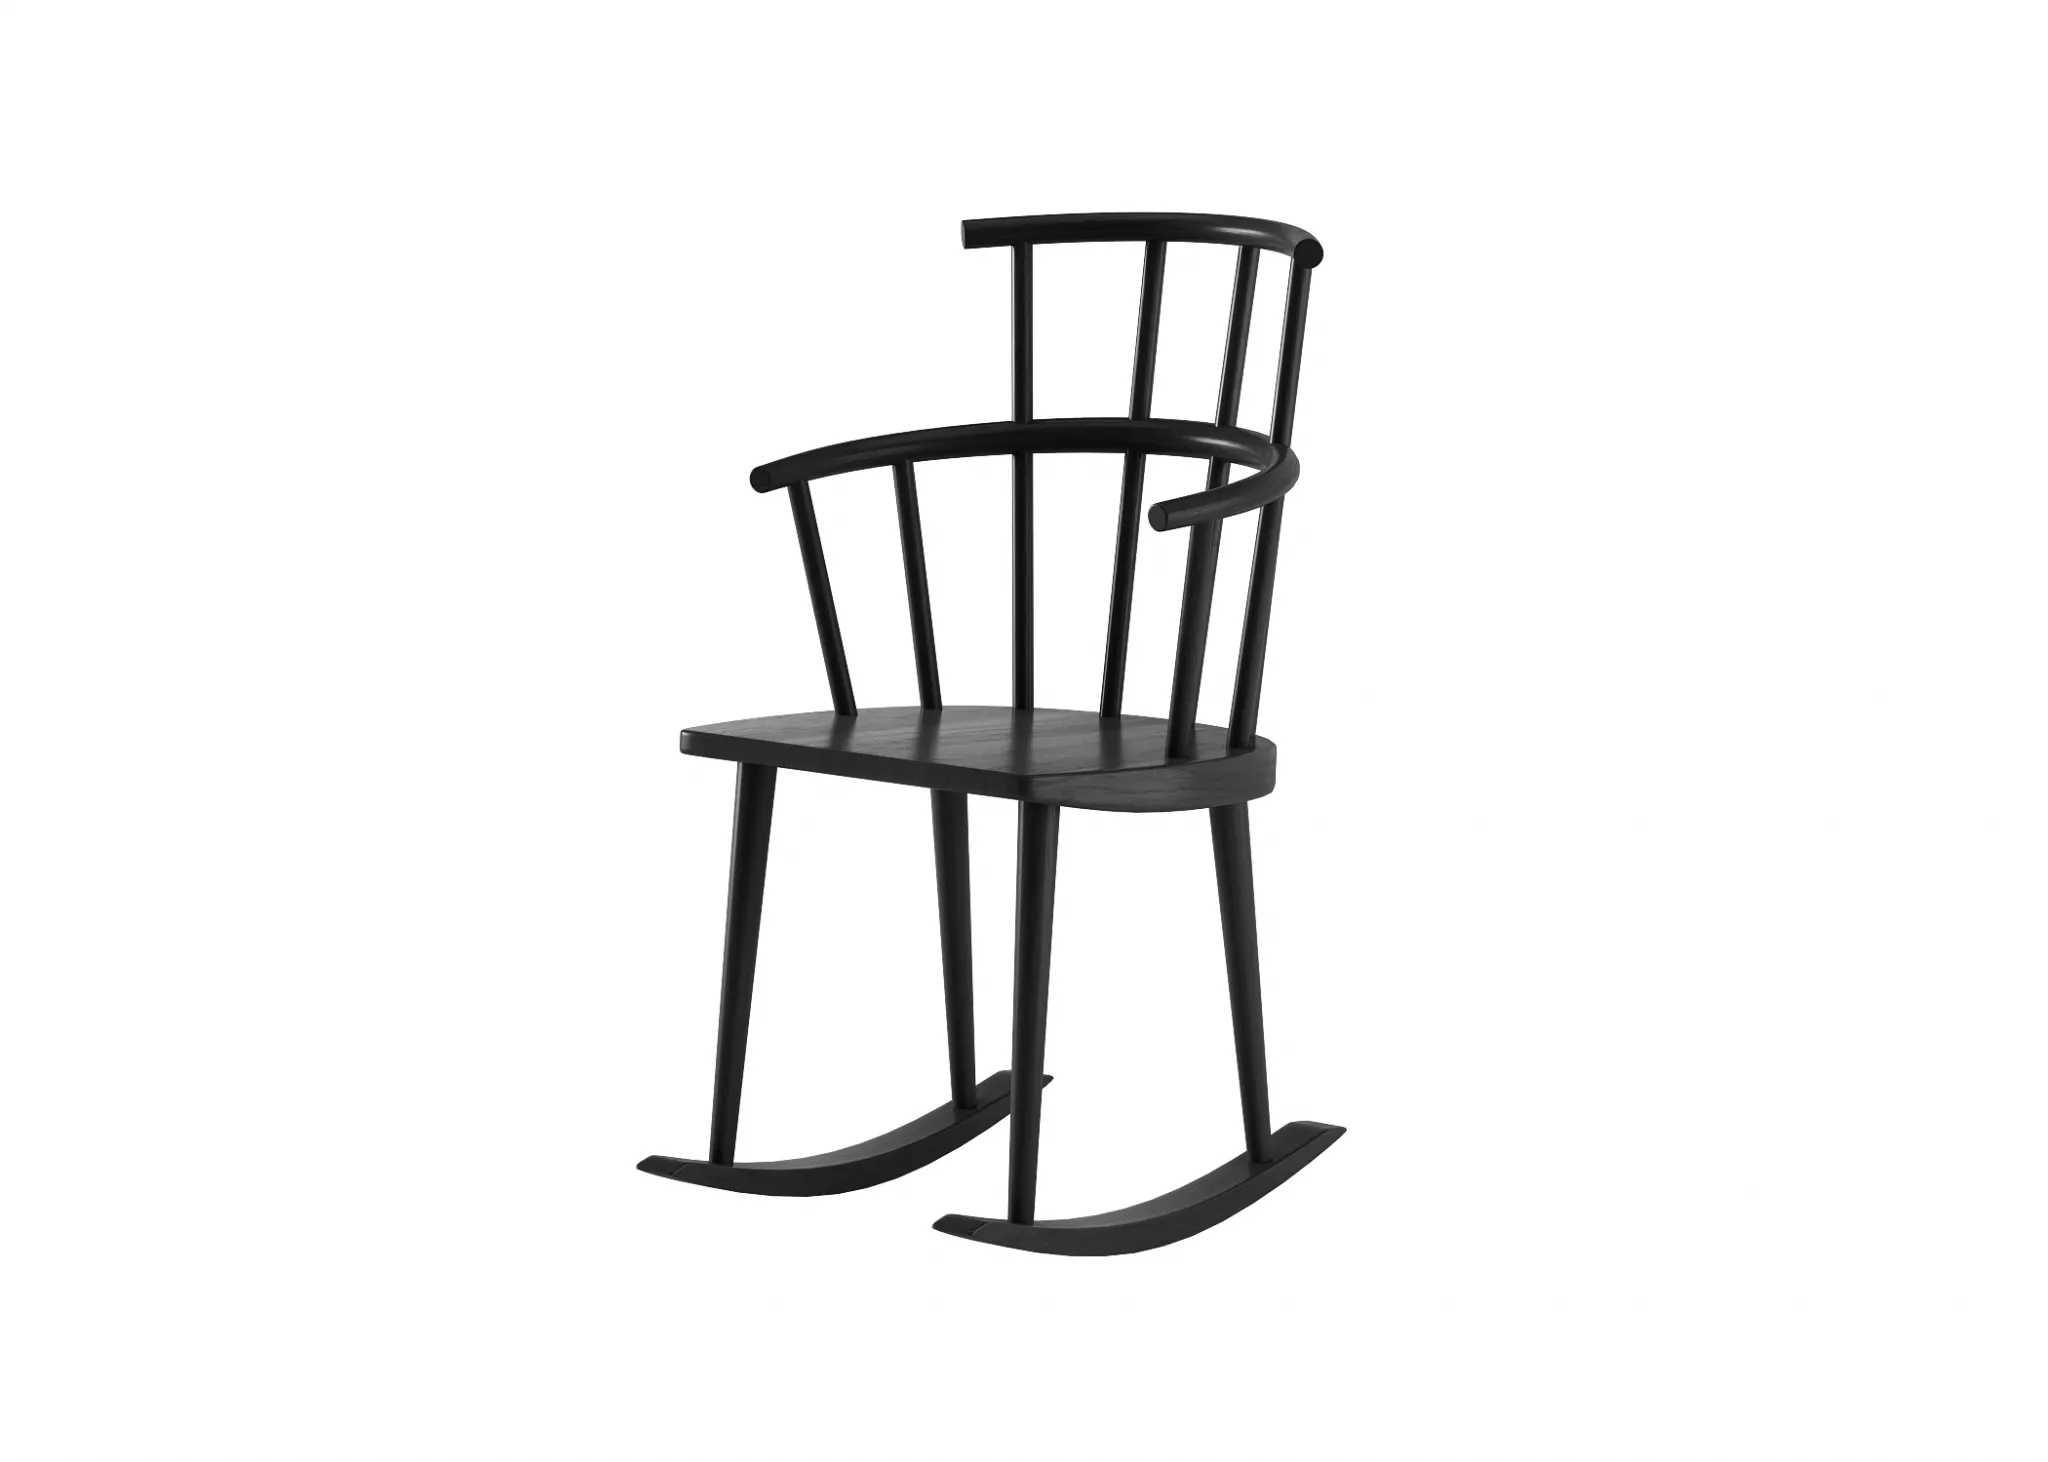 FURNITURE 3D MODELS – CHAIRS – 0315